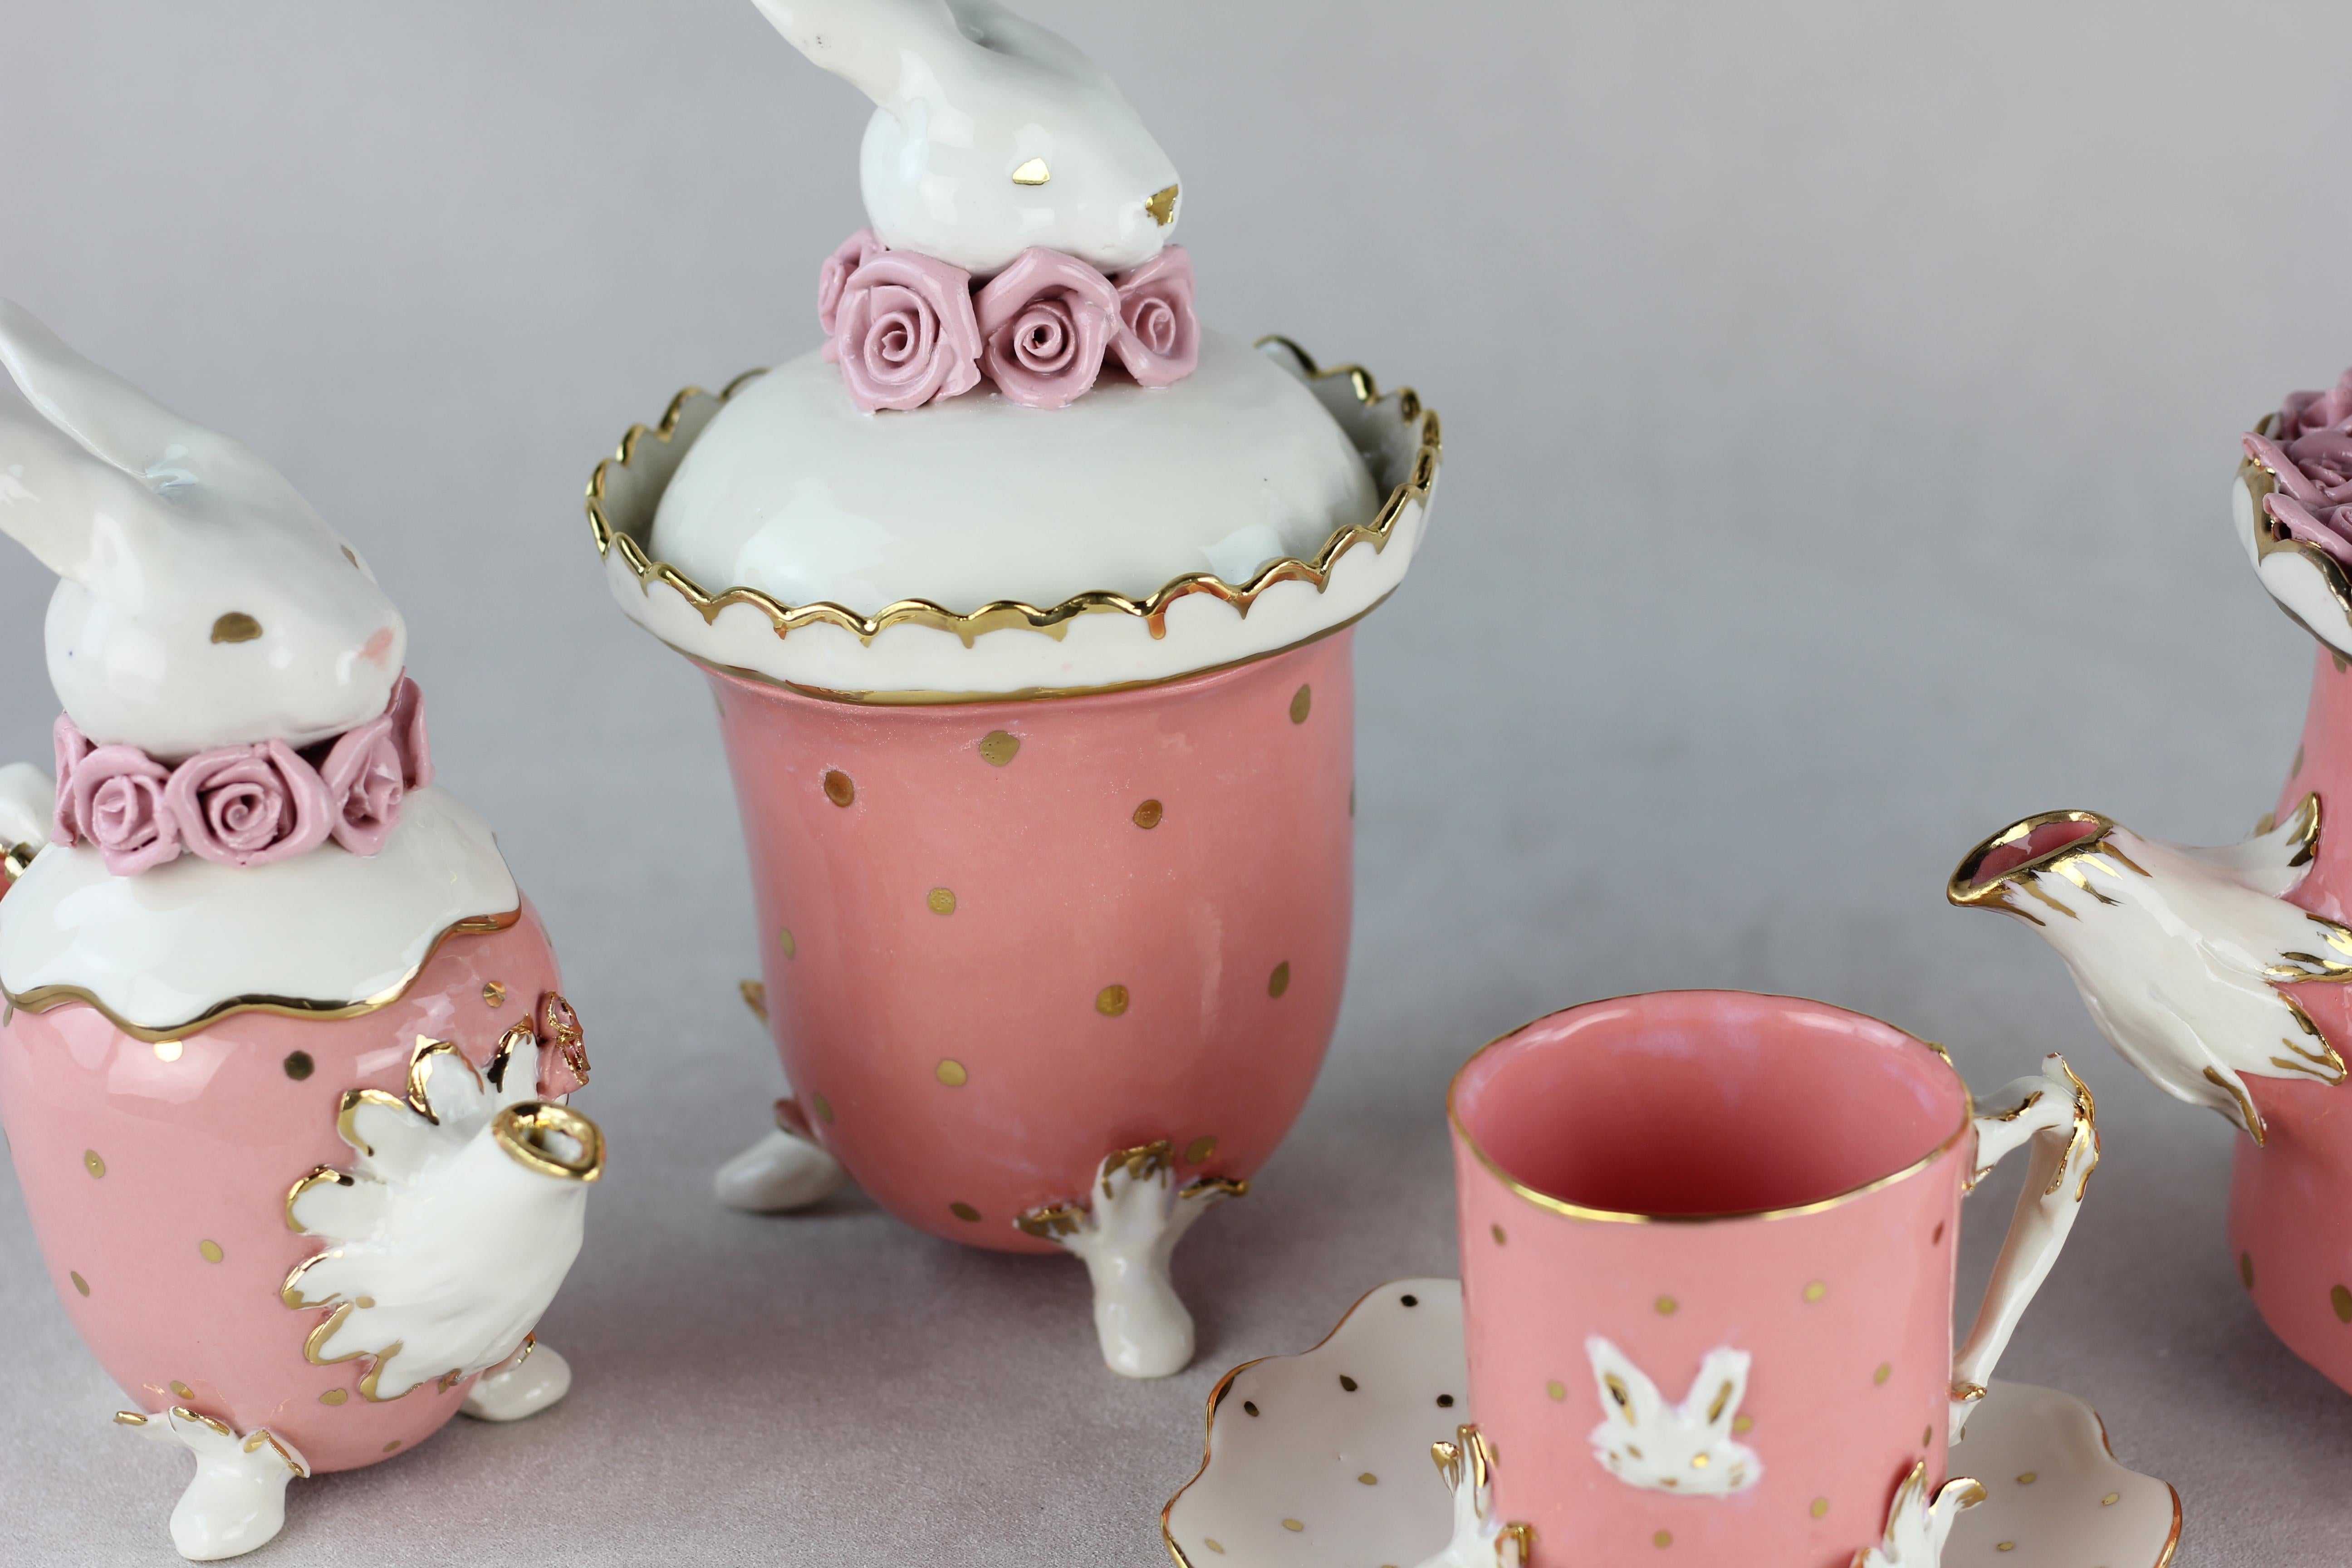 Our artisan's pieces are a dream come true, as in Cinderella's fairytail.
This ceramic piece is completely hand-crafted and painted with love and care. 
A set is consisting of a milk jug and its cover. 

Choose between different shapes, colours,